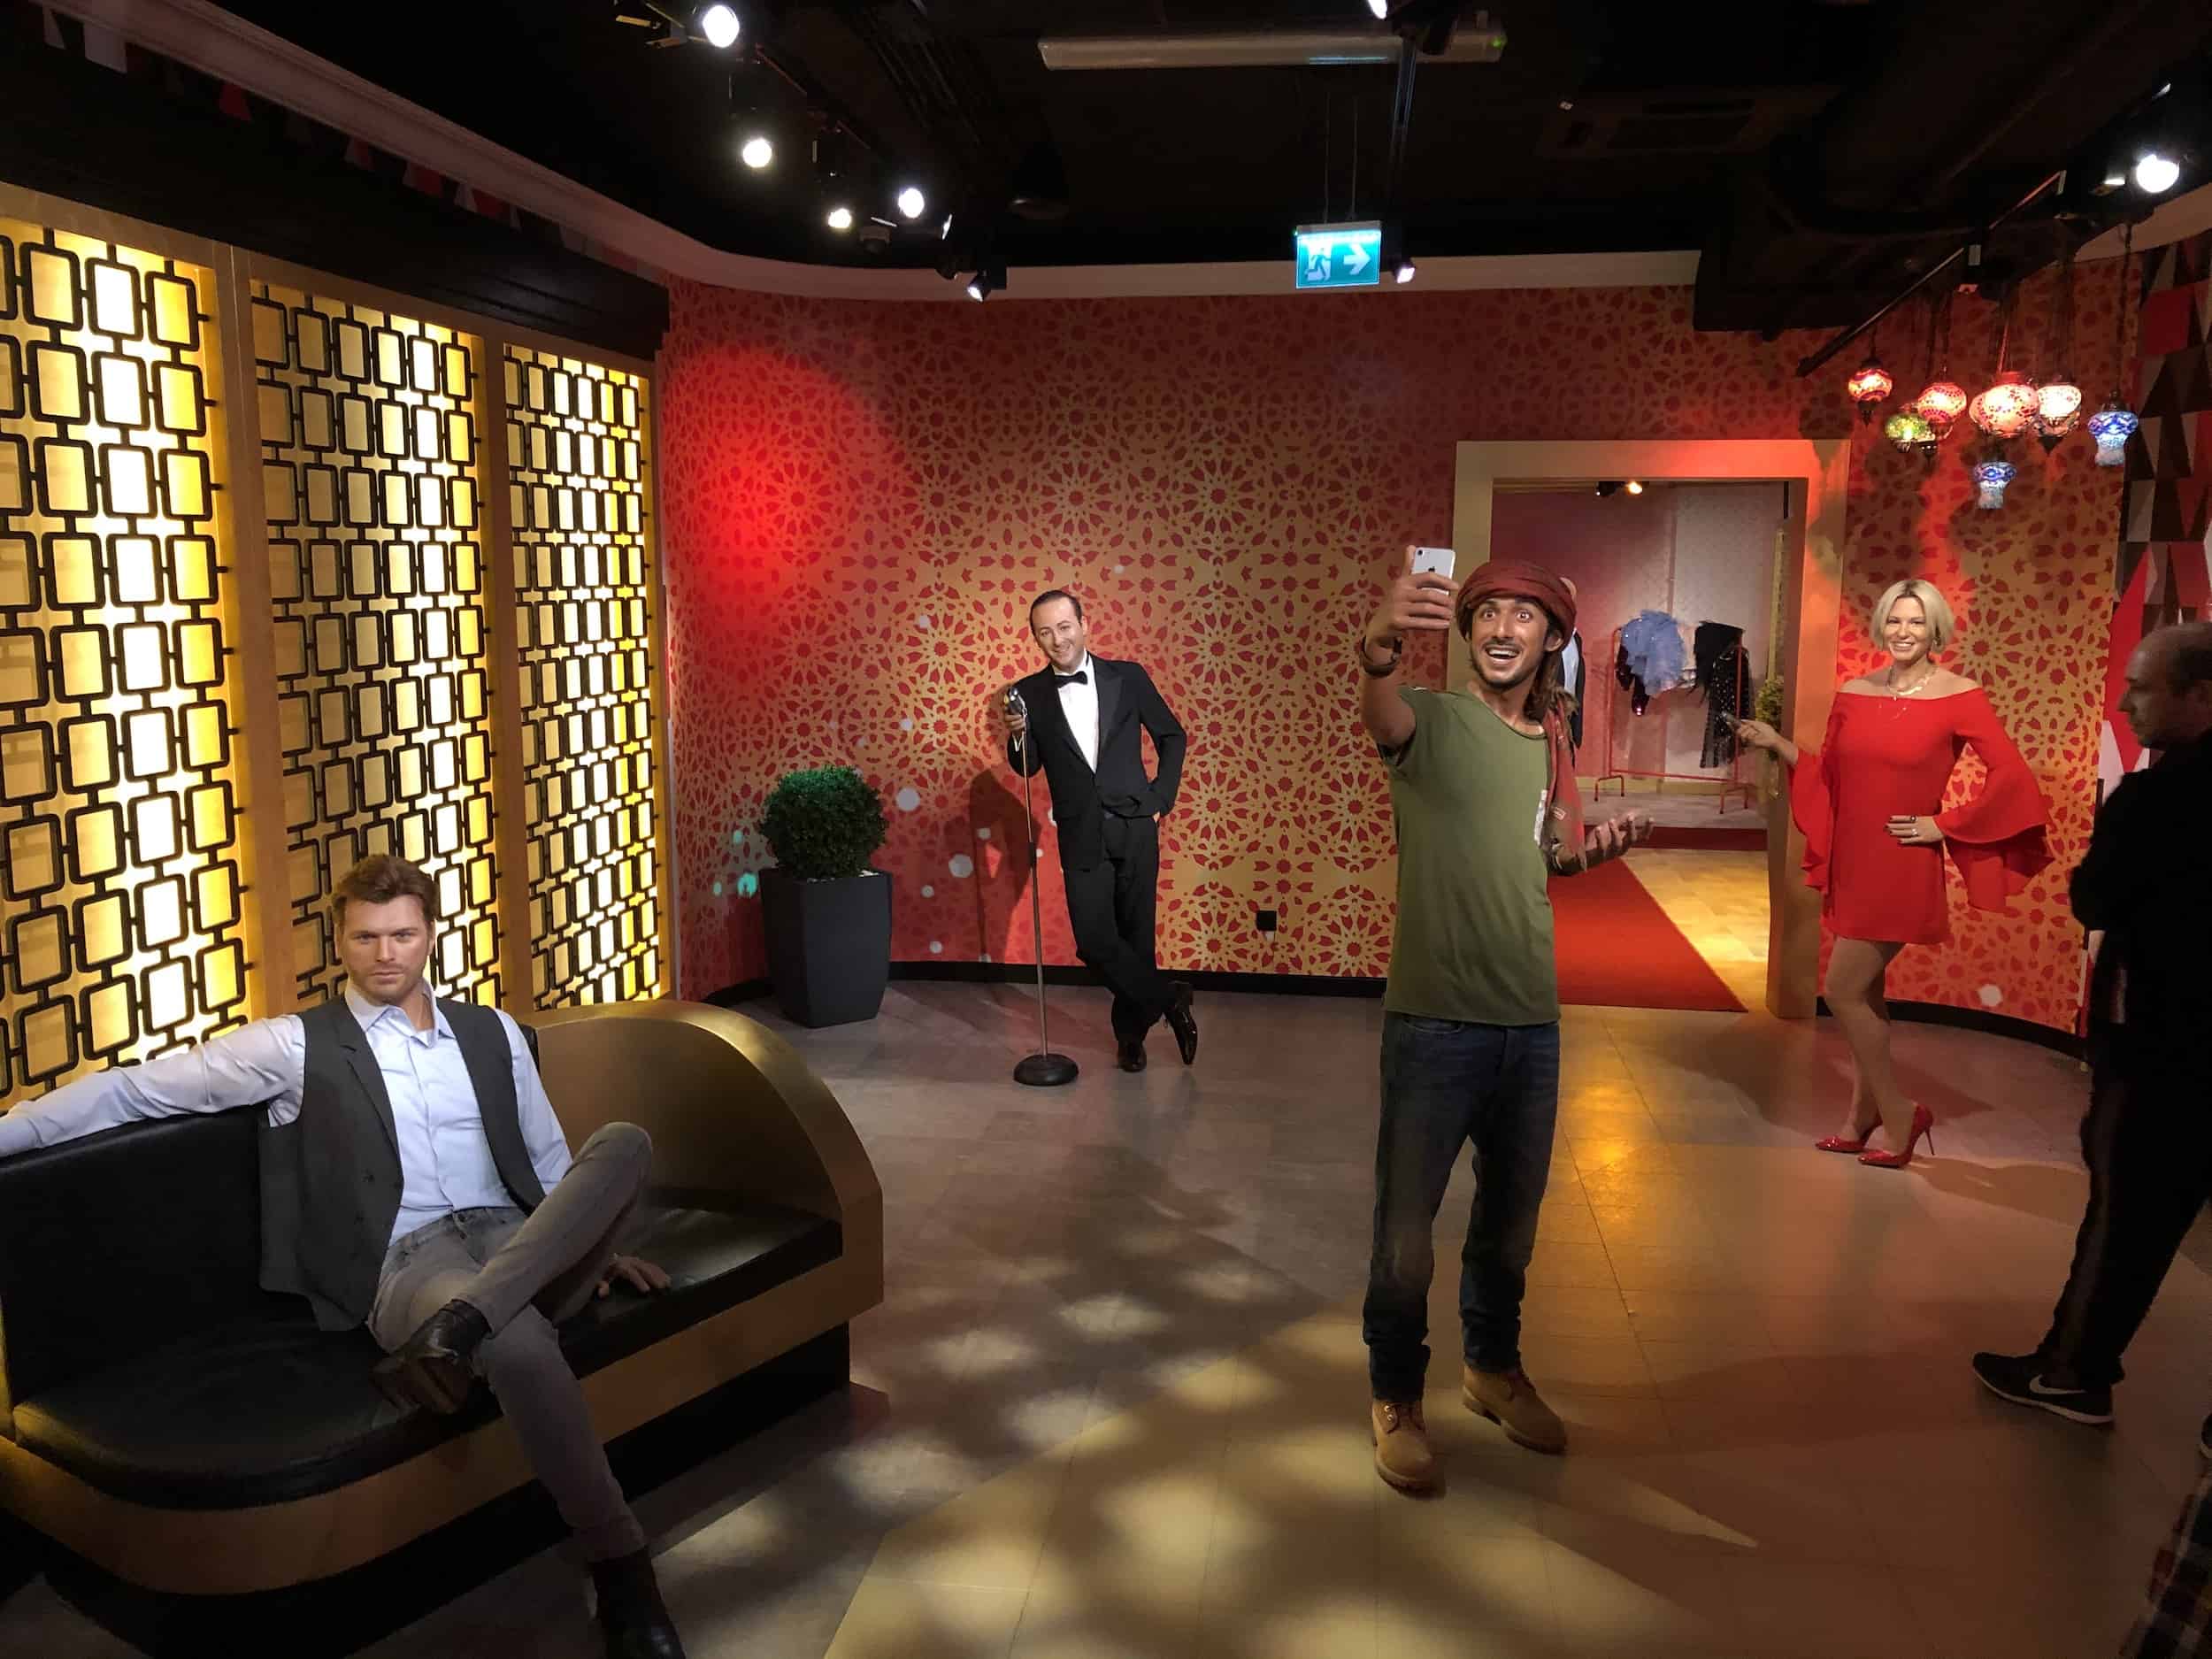 Turkish and Middle Eastern stars at Madame Tussauds Istanbul